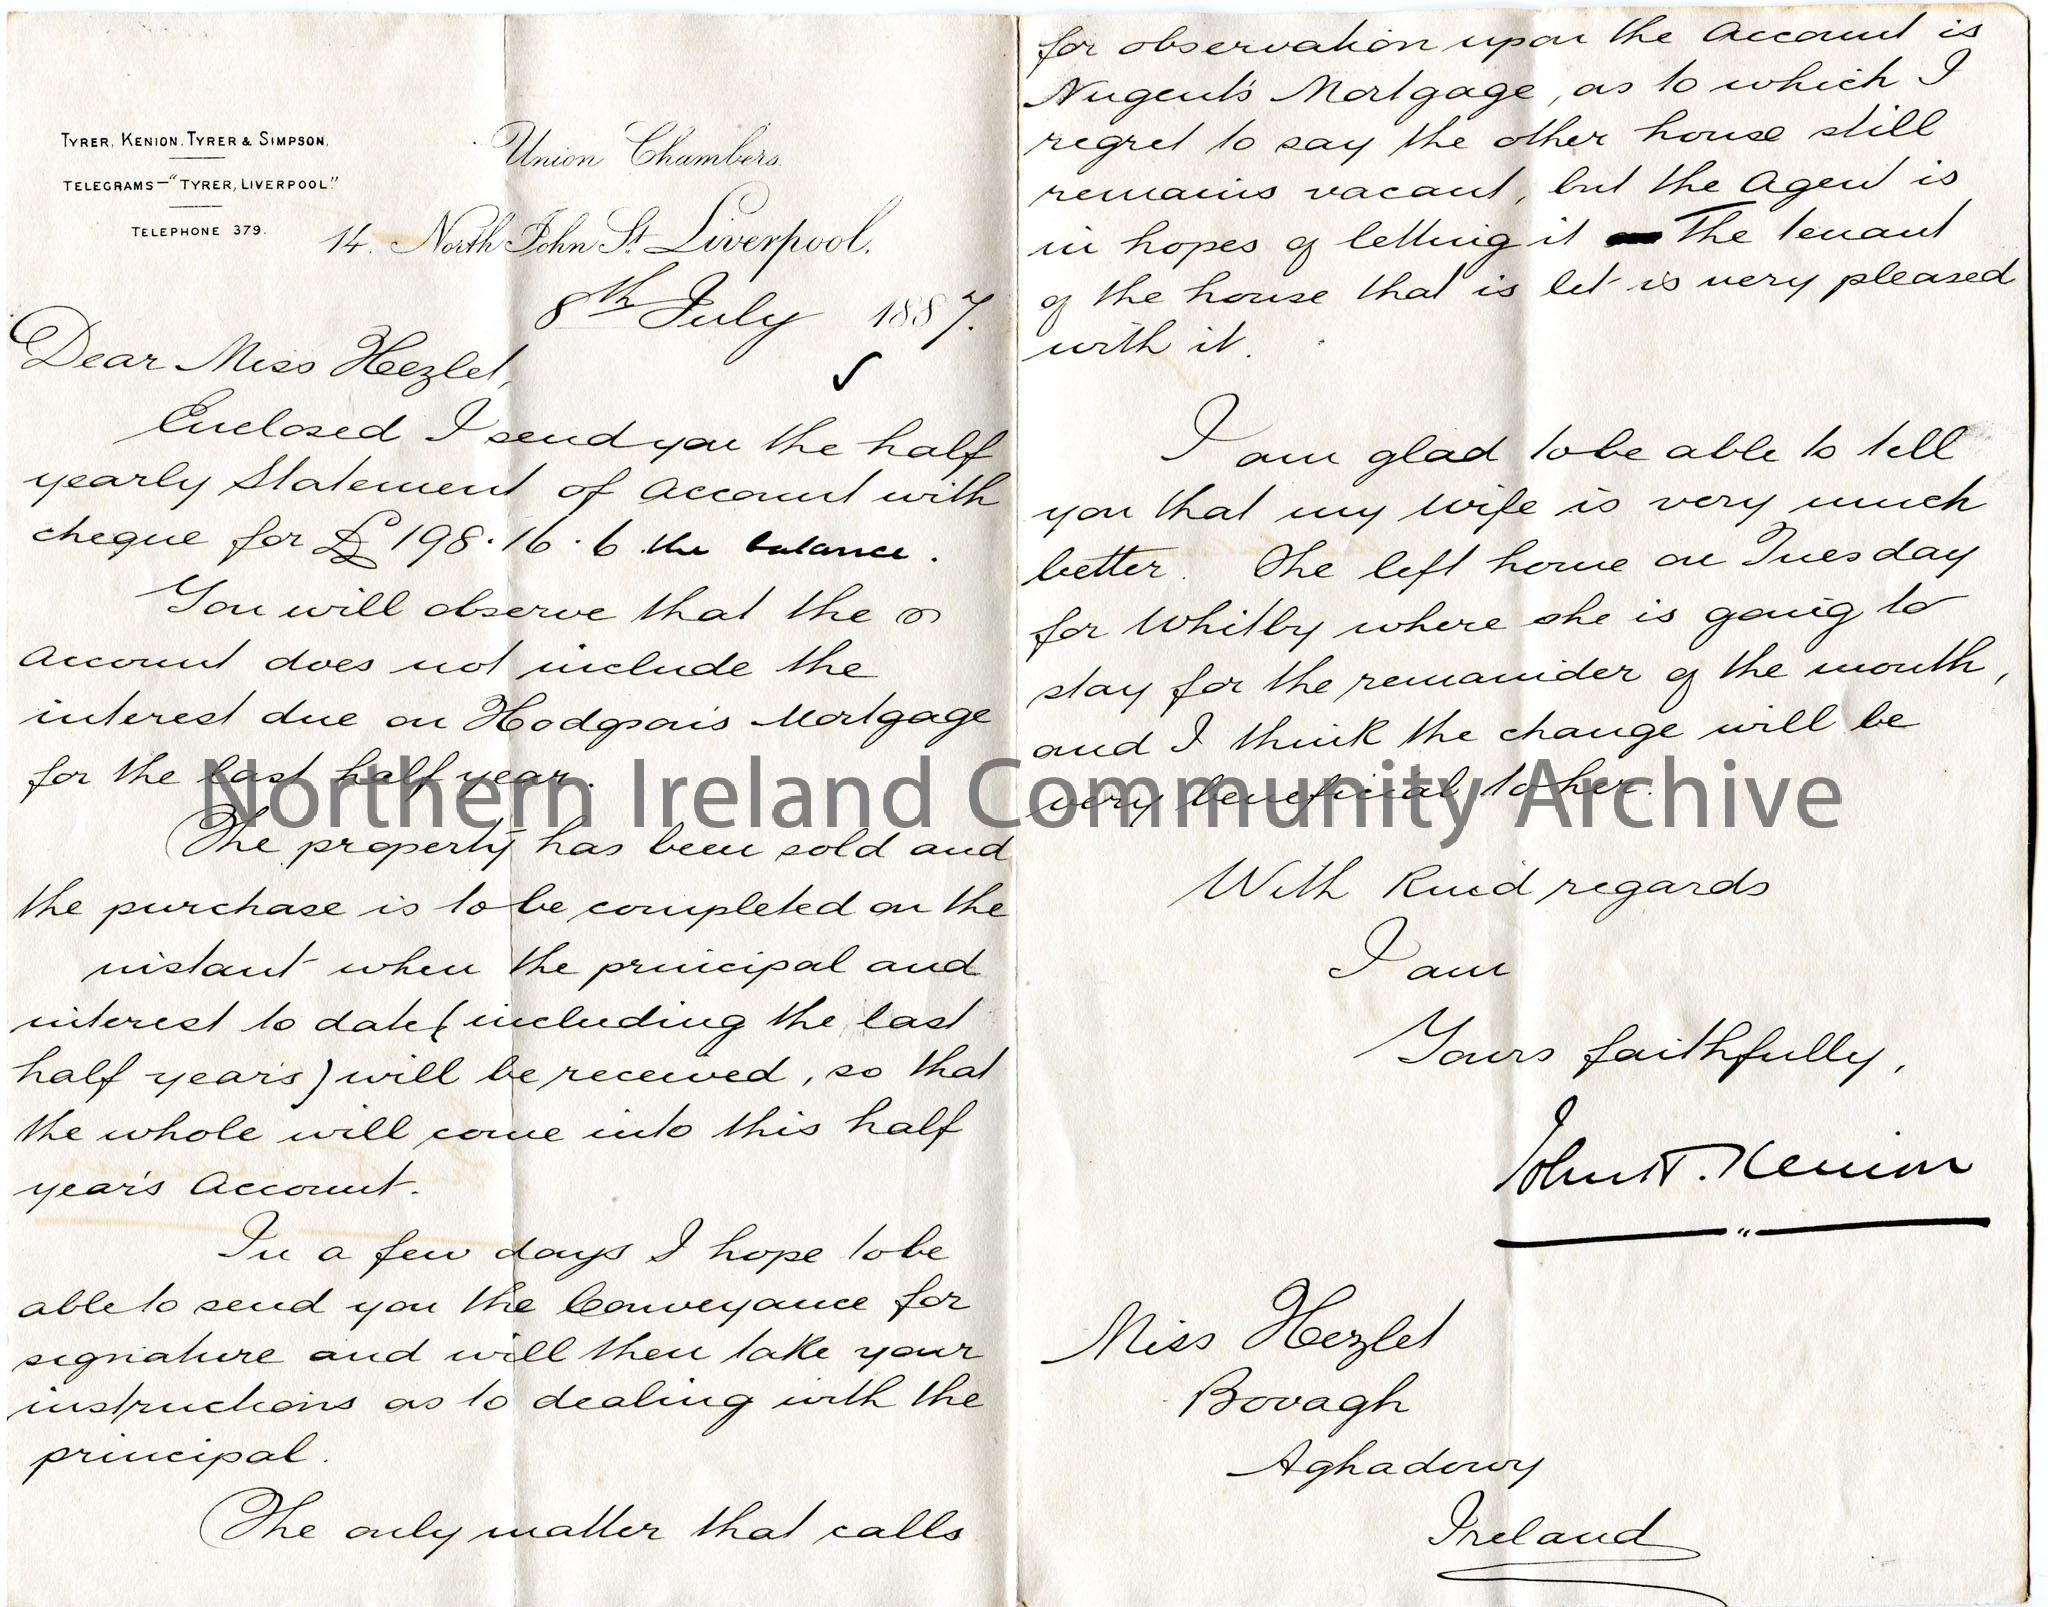 Handwritten letter to Miss Hezlet at Bovagh, Aghadowey, Ireland. Encloses half yearly statement of accounts and cheque for £198.16.6. The propert…